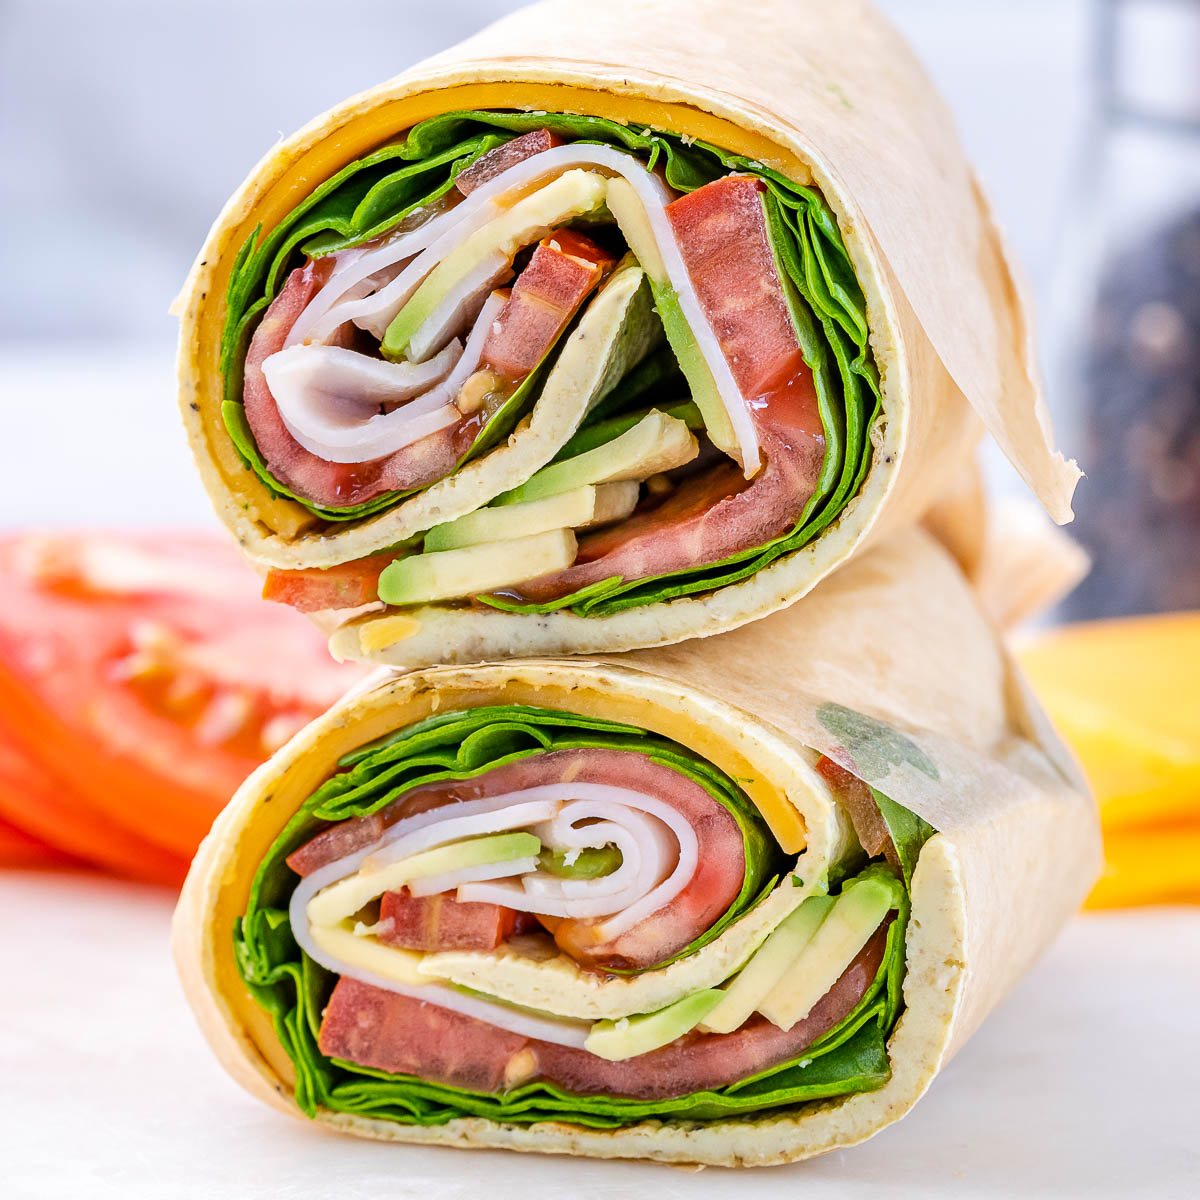 https://cleanfoodcrush.com/wp-content/uploads/2021/07/Protein-Packed-Breakfast-Egg-Wrap-Clean-Eating-Recipe.jpg